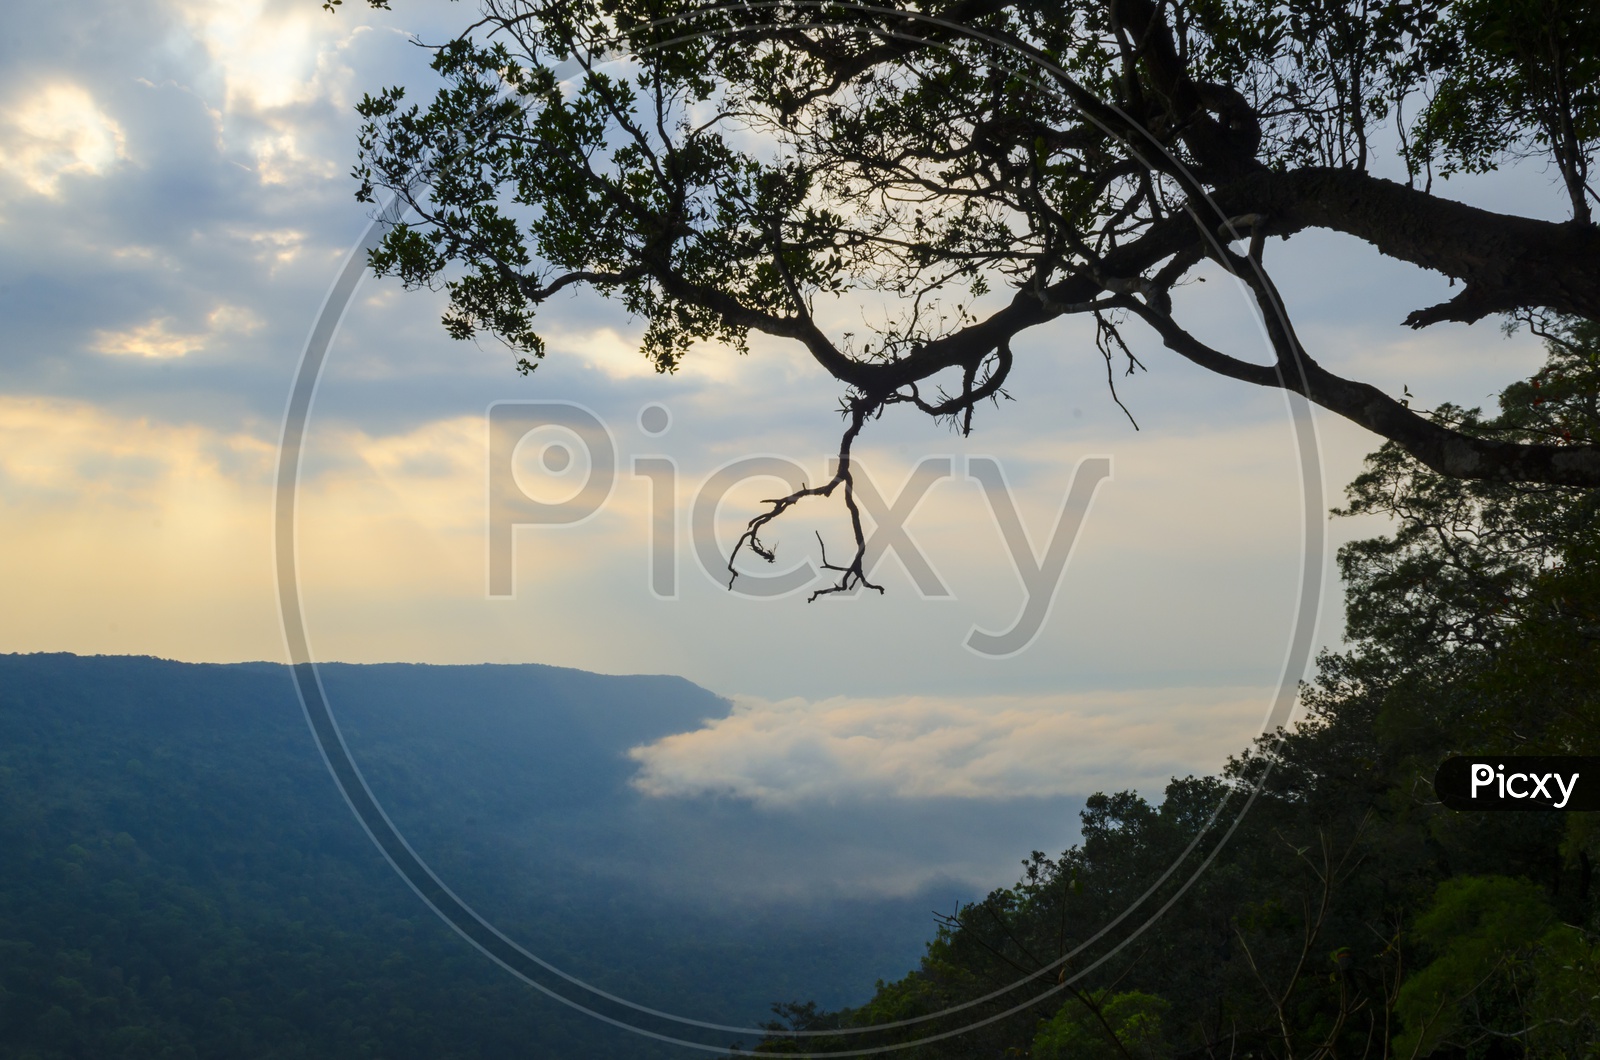 Panoramic  View Pha Deaw Dai Cliffs of The Khao Yai National Park in Thailand